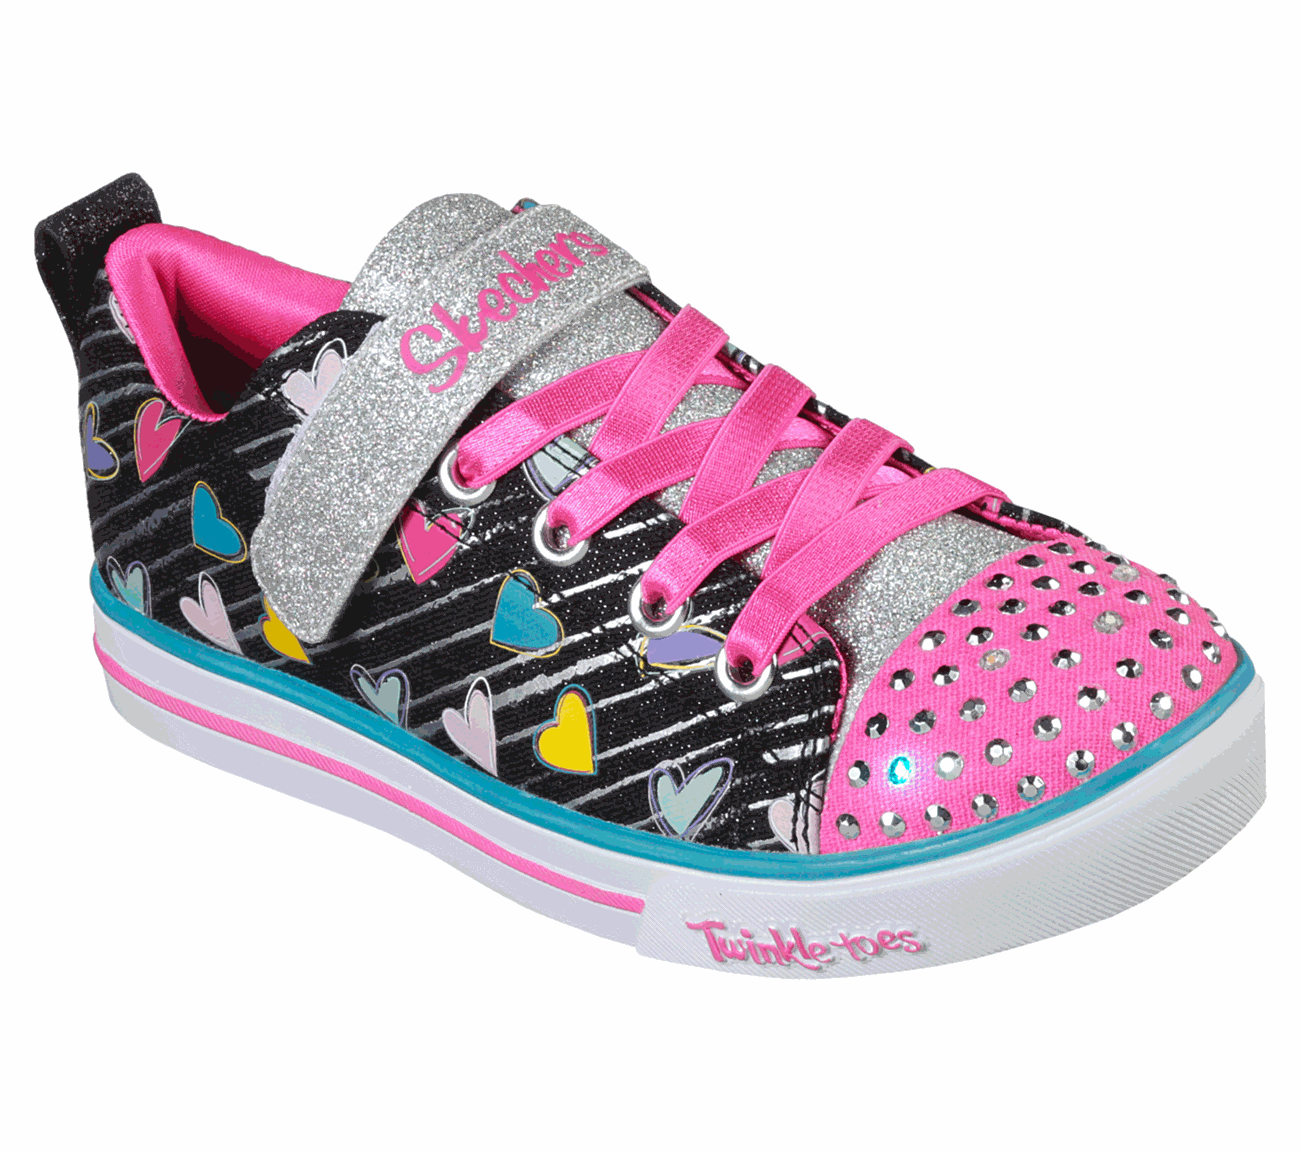 where to buy twinkle toes shoes